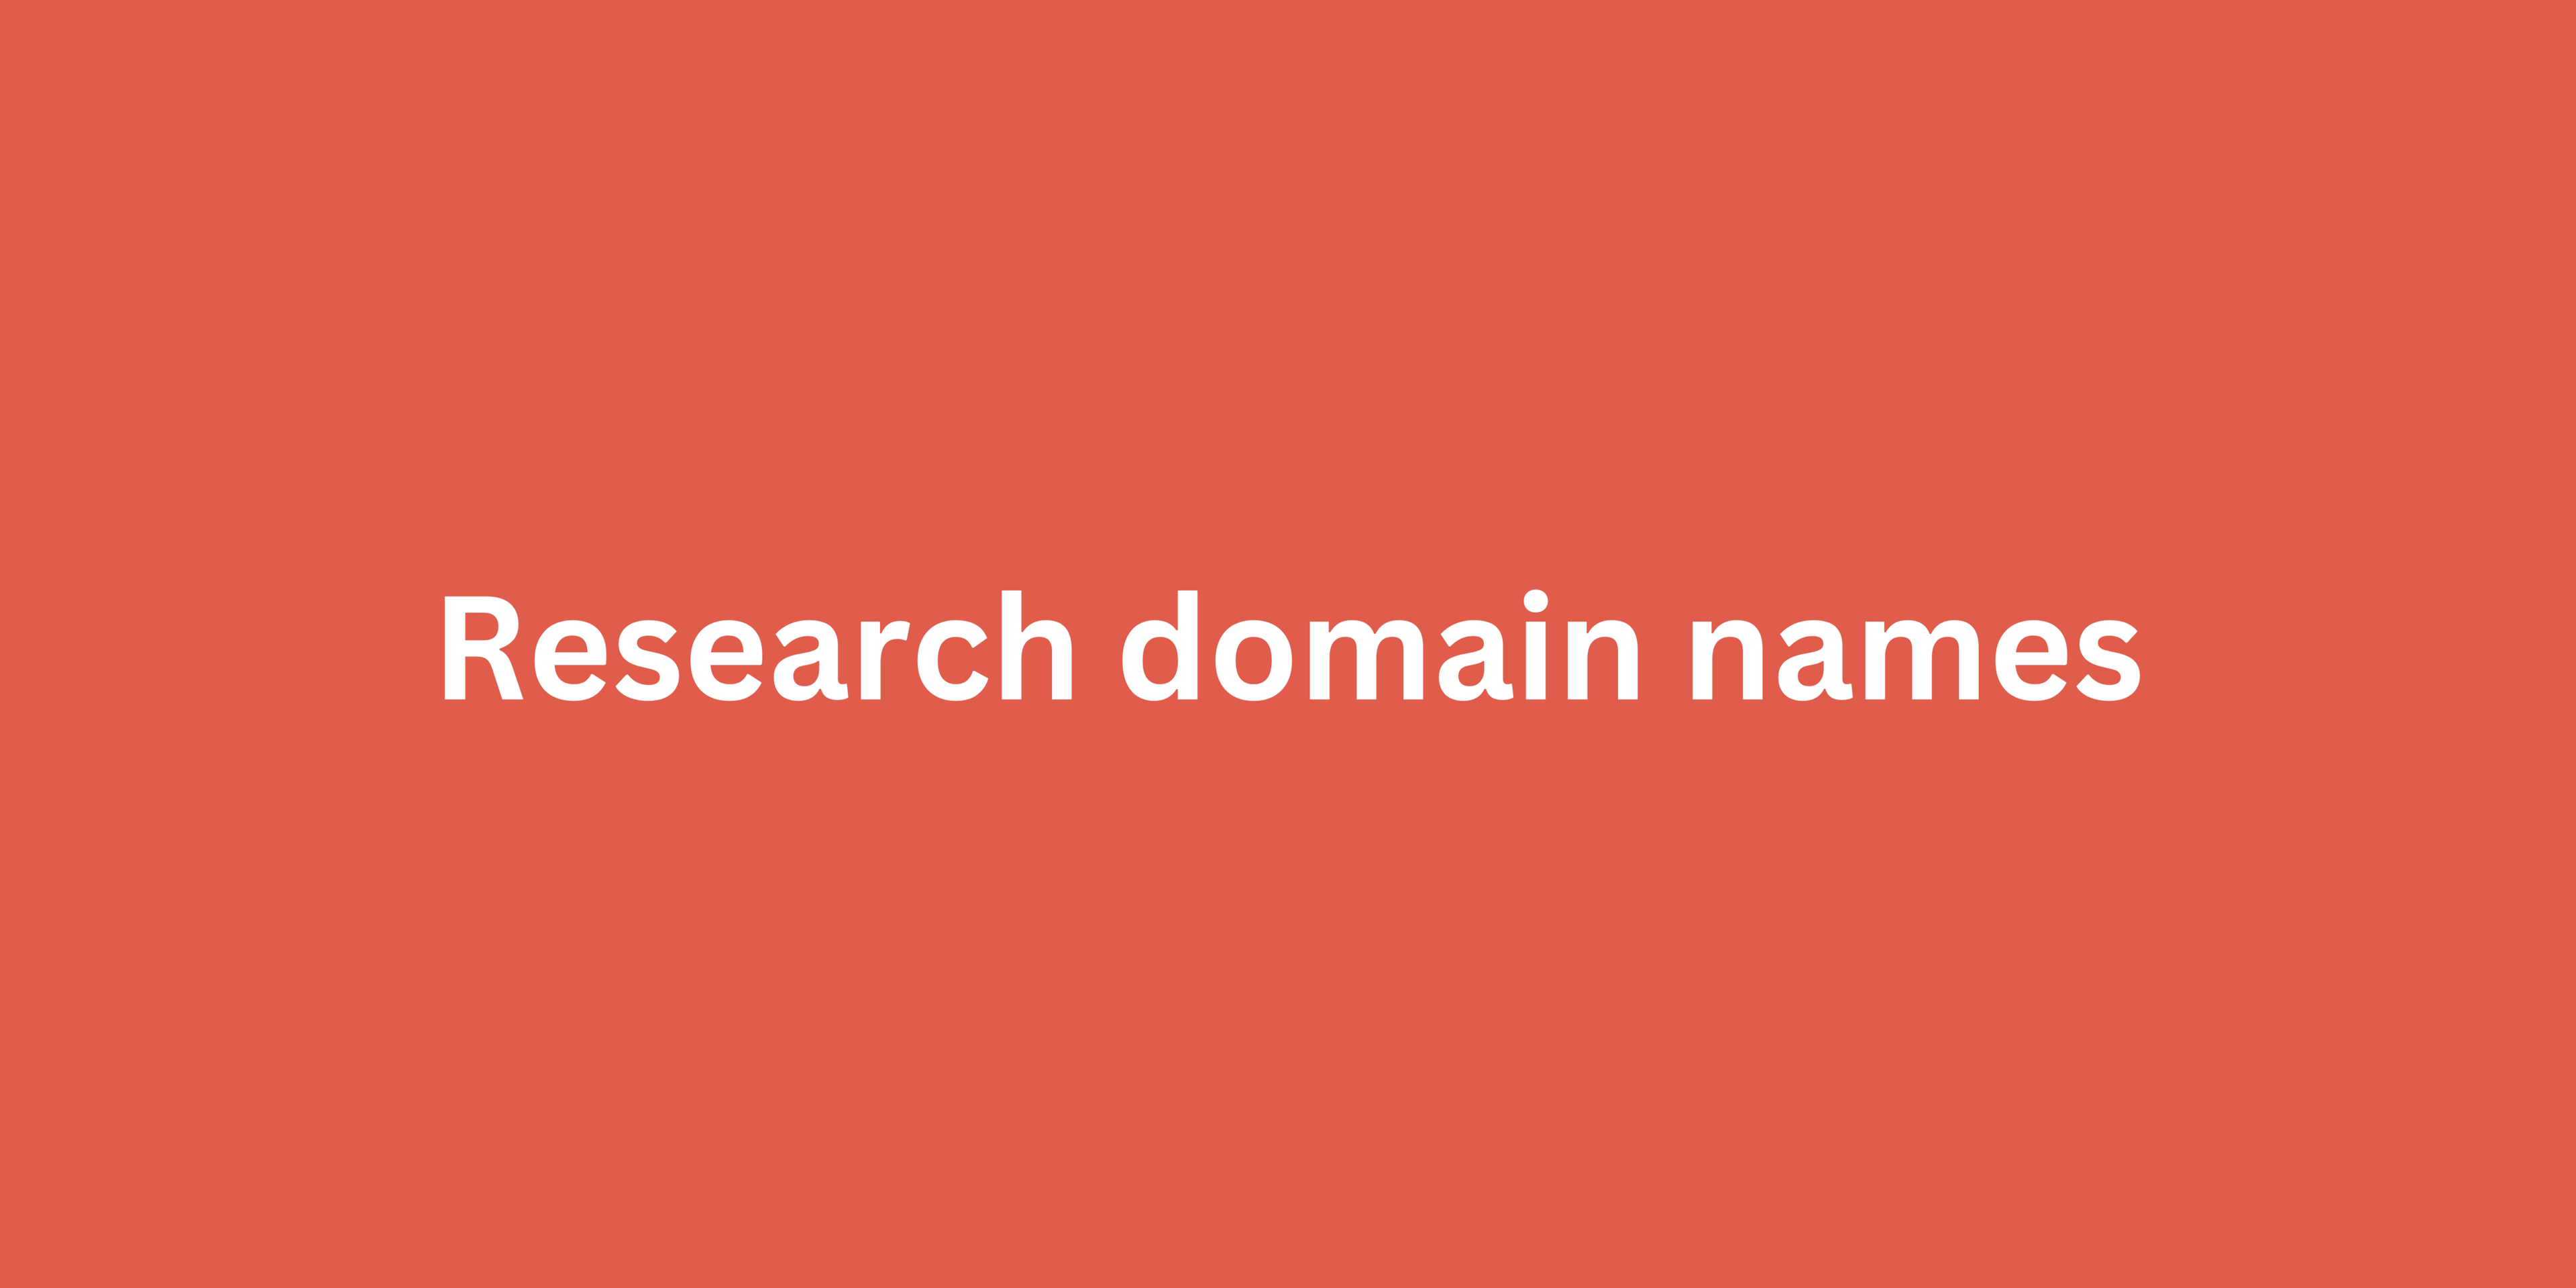 Research domain names